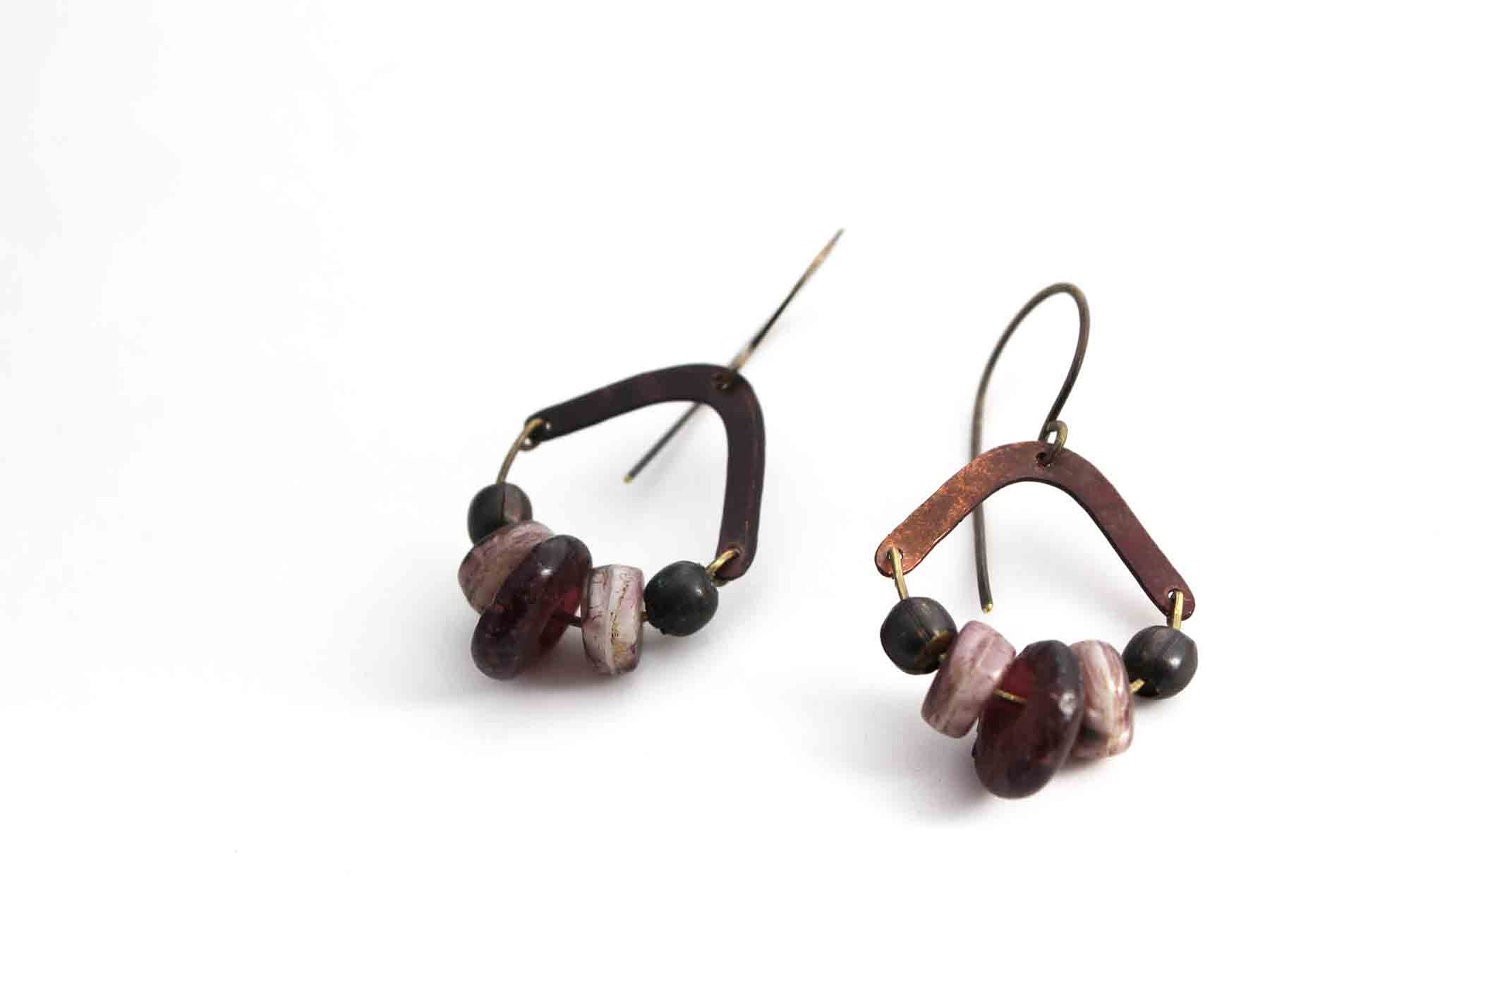 Berries and copper earrings - blackberry mauve glass beads - tribal inspired - LucieTales